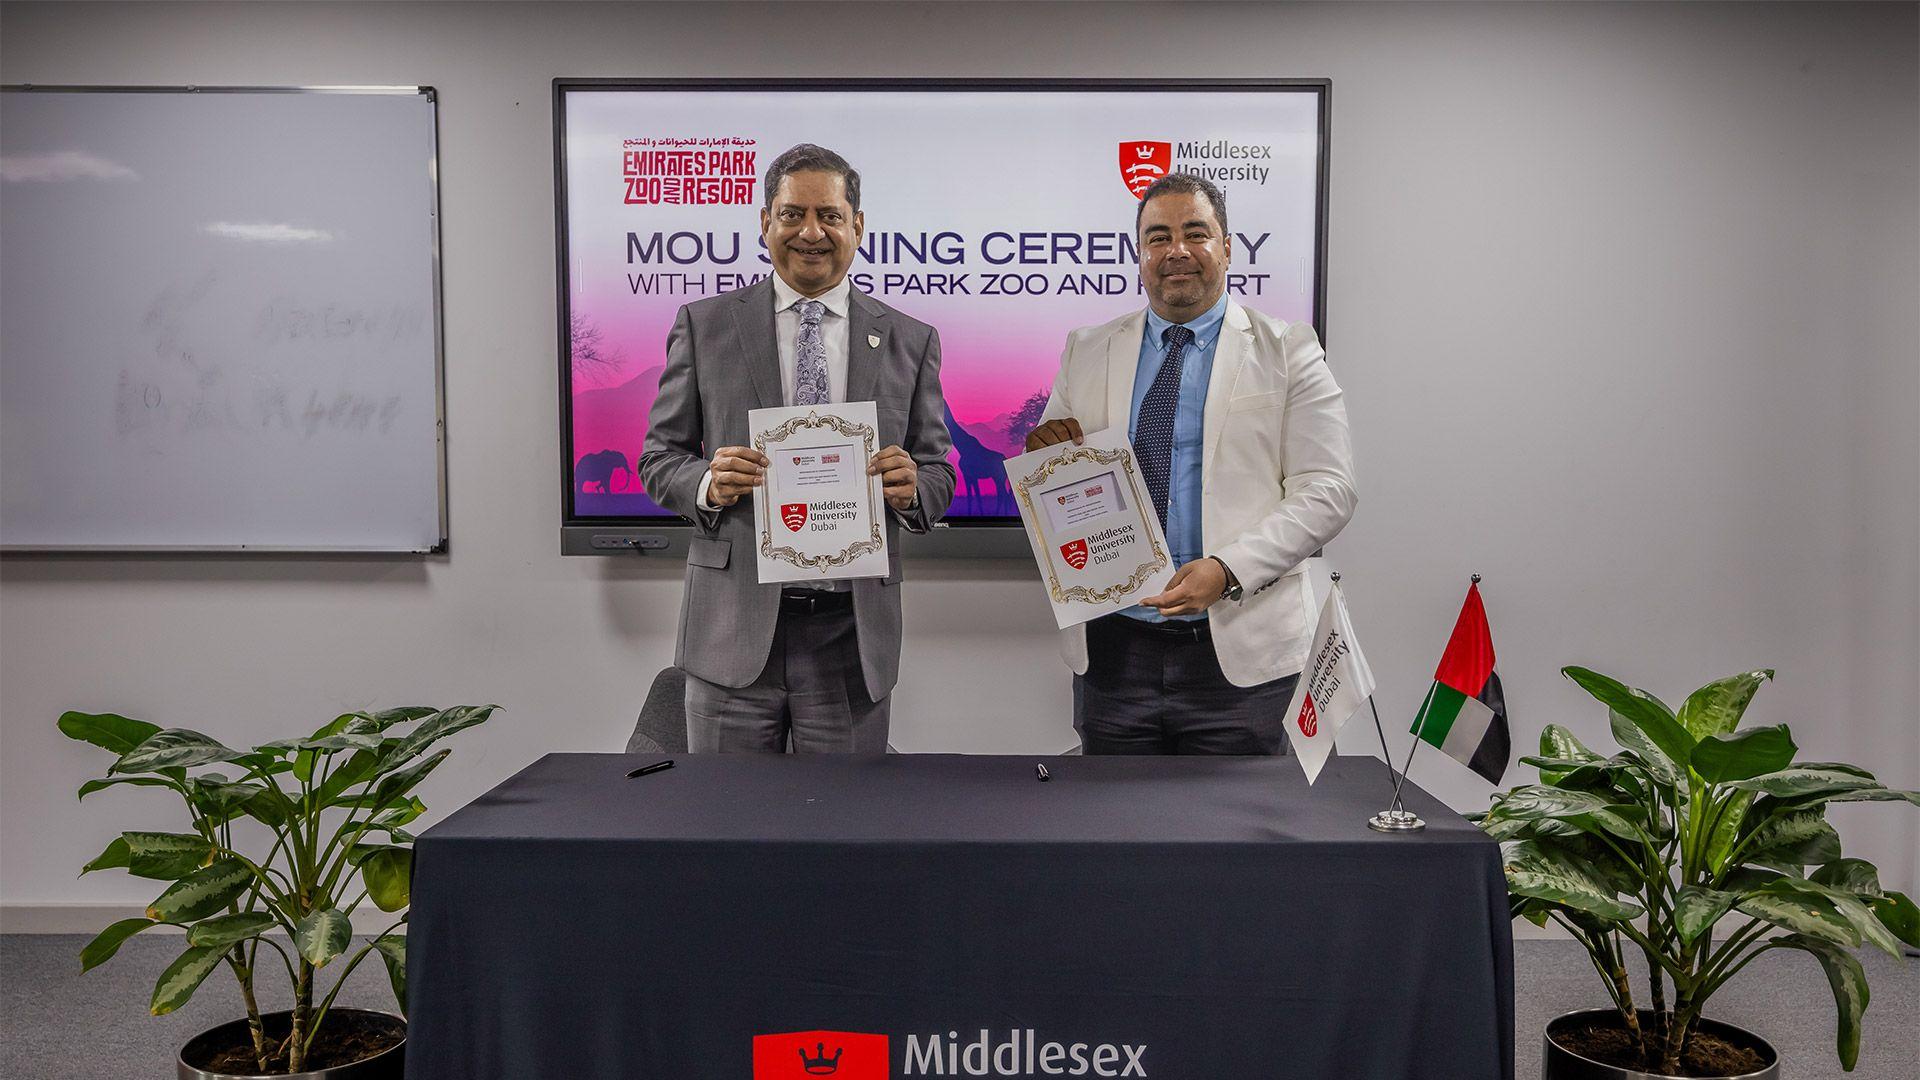 Middlesex University (MDX) Dubai is excited to announce the signing of a Memorandum of Understanding (MoU) with Emirates Park Zoo & Resort (EPZR) on 2 July 2024